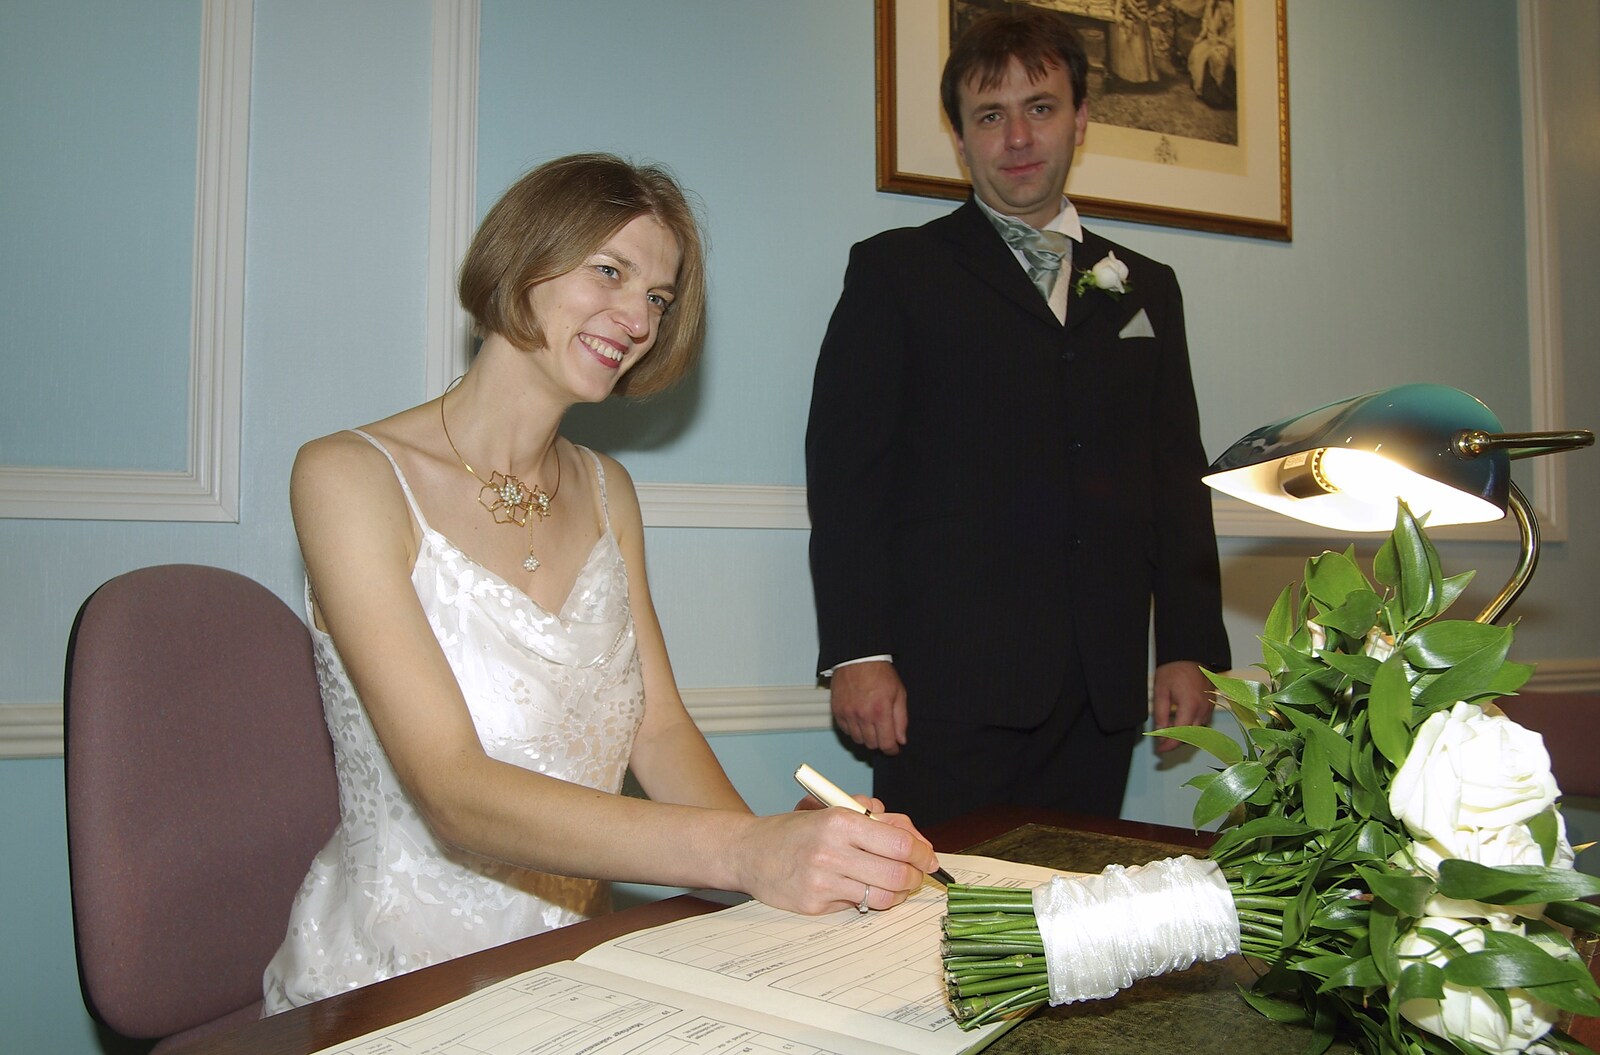 Liviu and Christina's Wedding Day, Babraham, Cambridge - 11th August 2007: Christina does a spot of fake signing for the cameras, as Liviu looks on